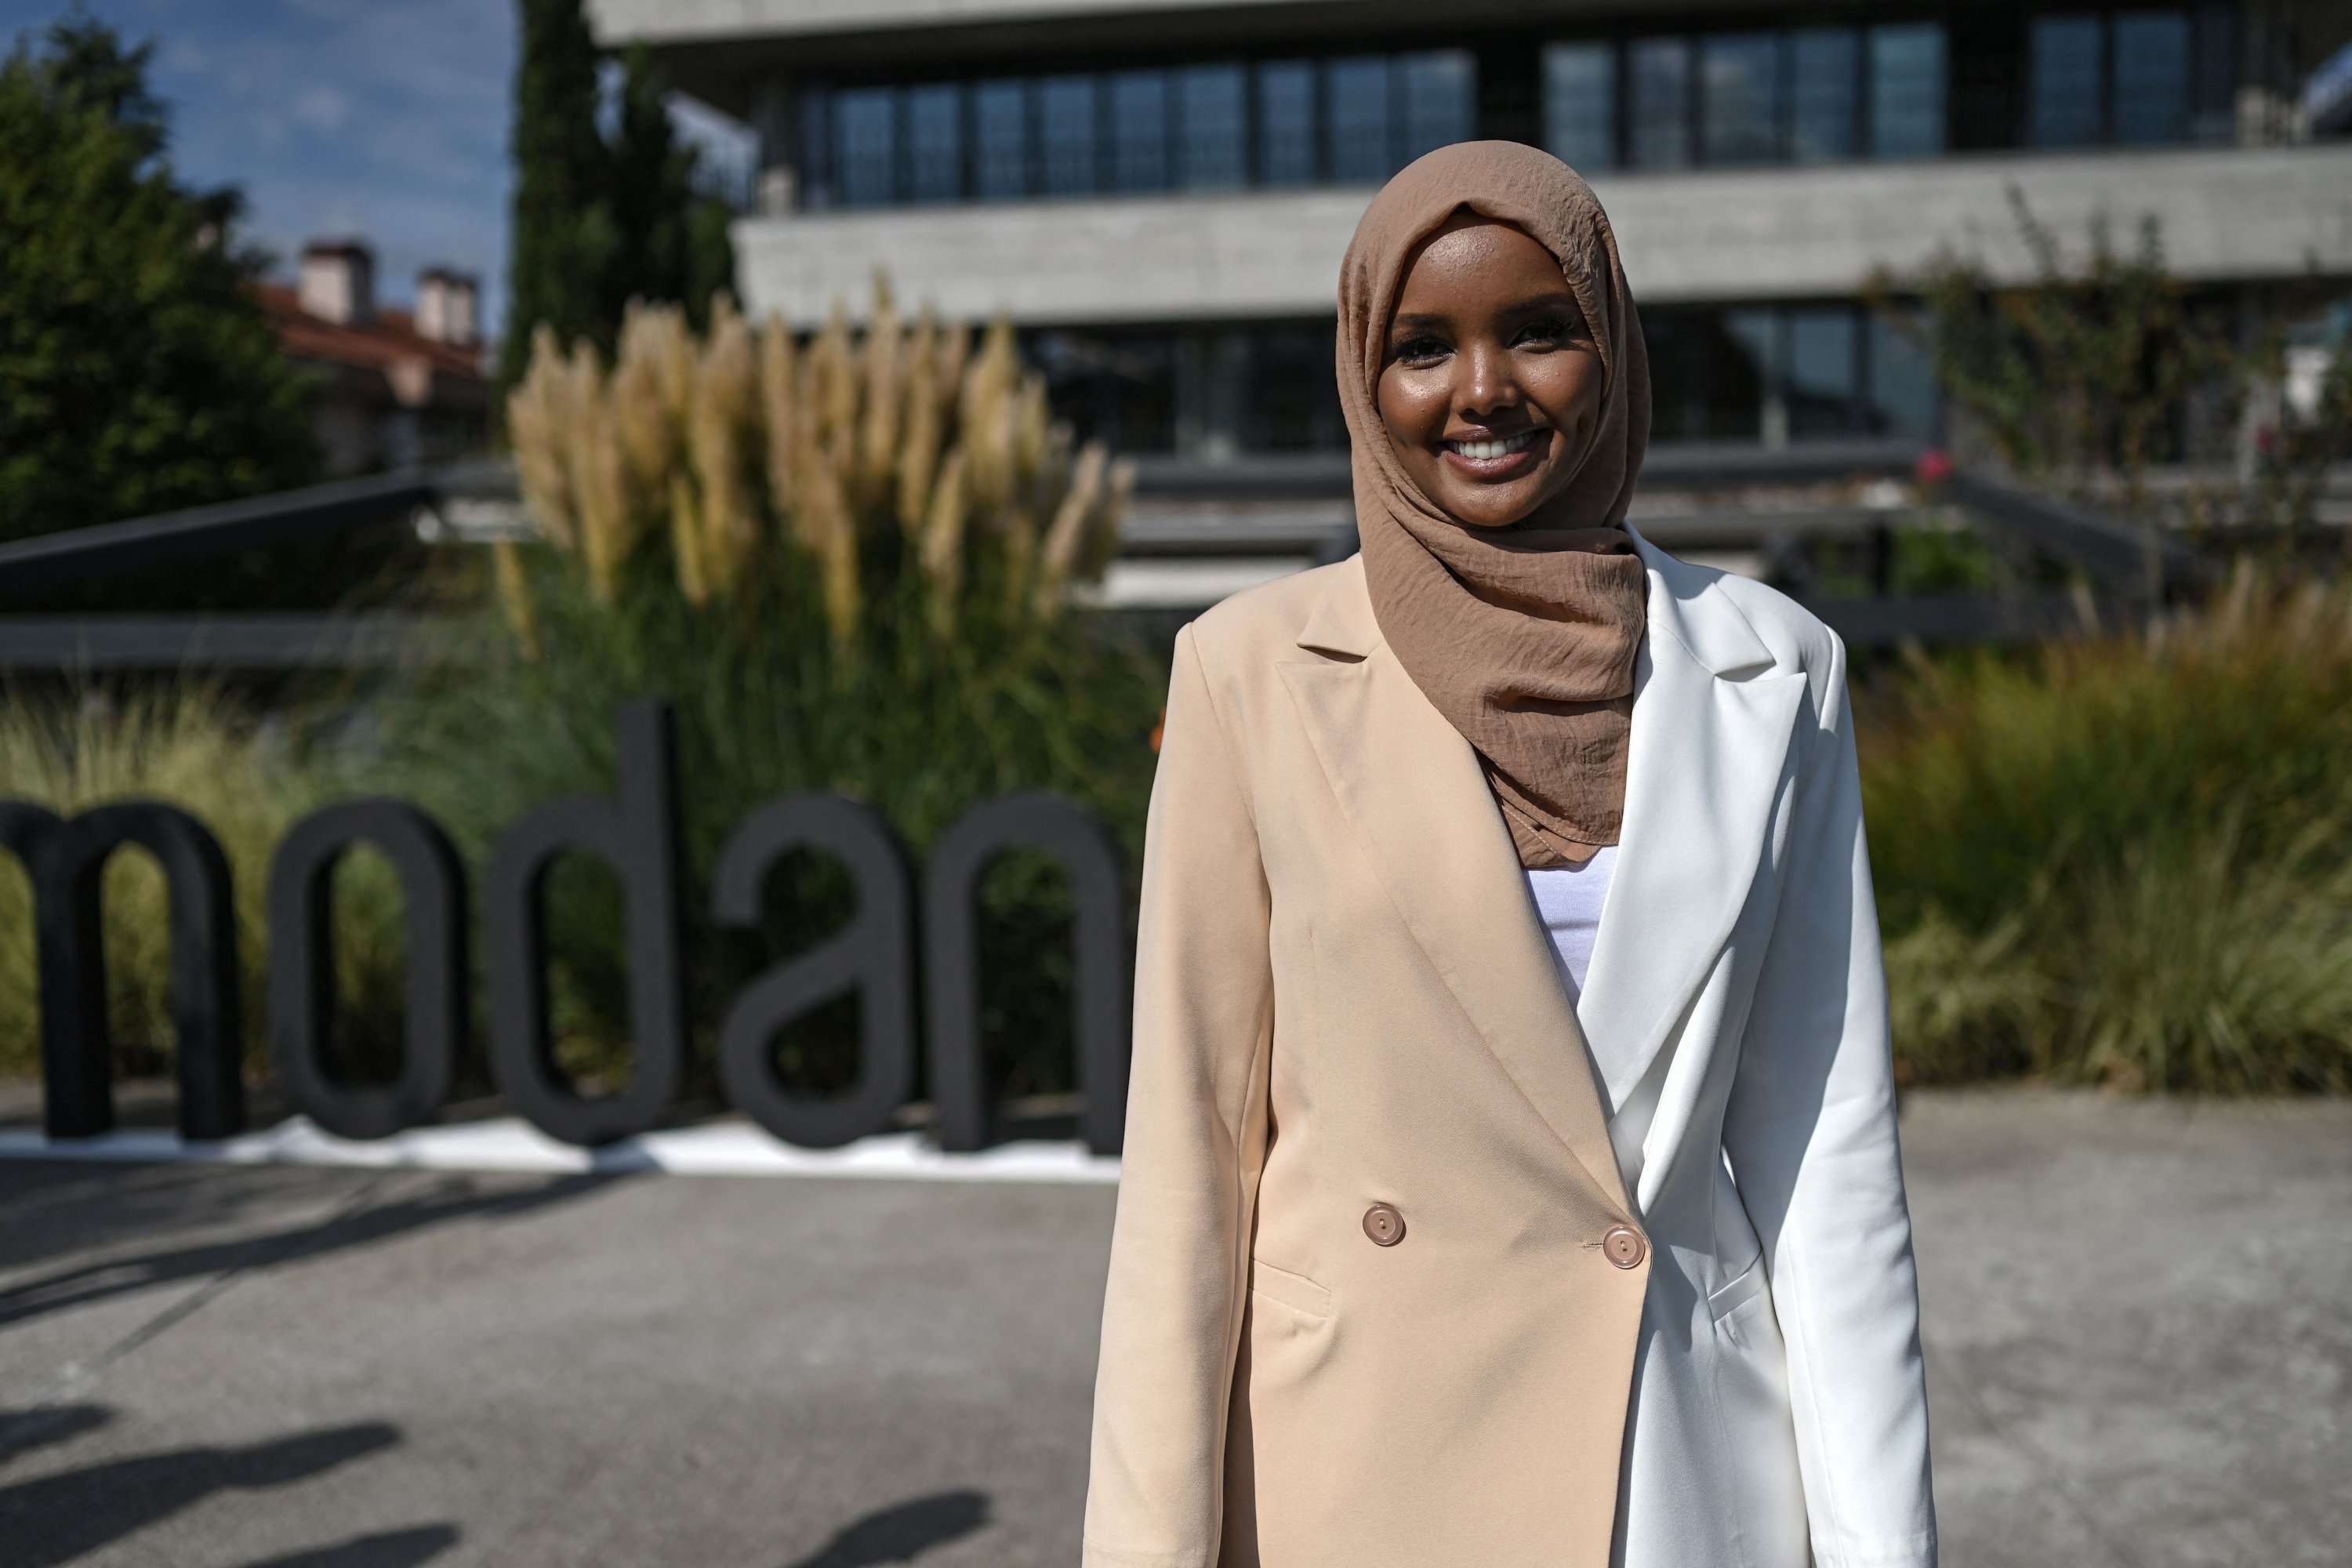 Somali-American former model Halima Aden poses for a photo, during an event in Istanbul, Turkey, Sept. 14, 2021. (AFP Photo)